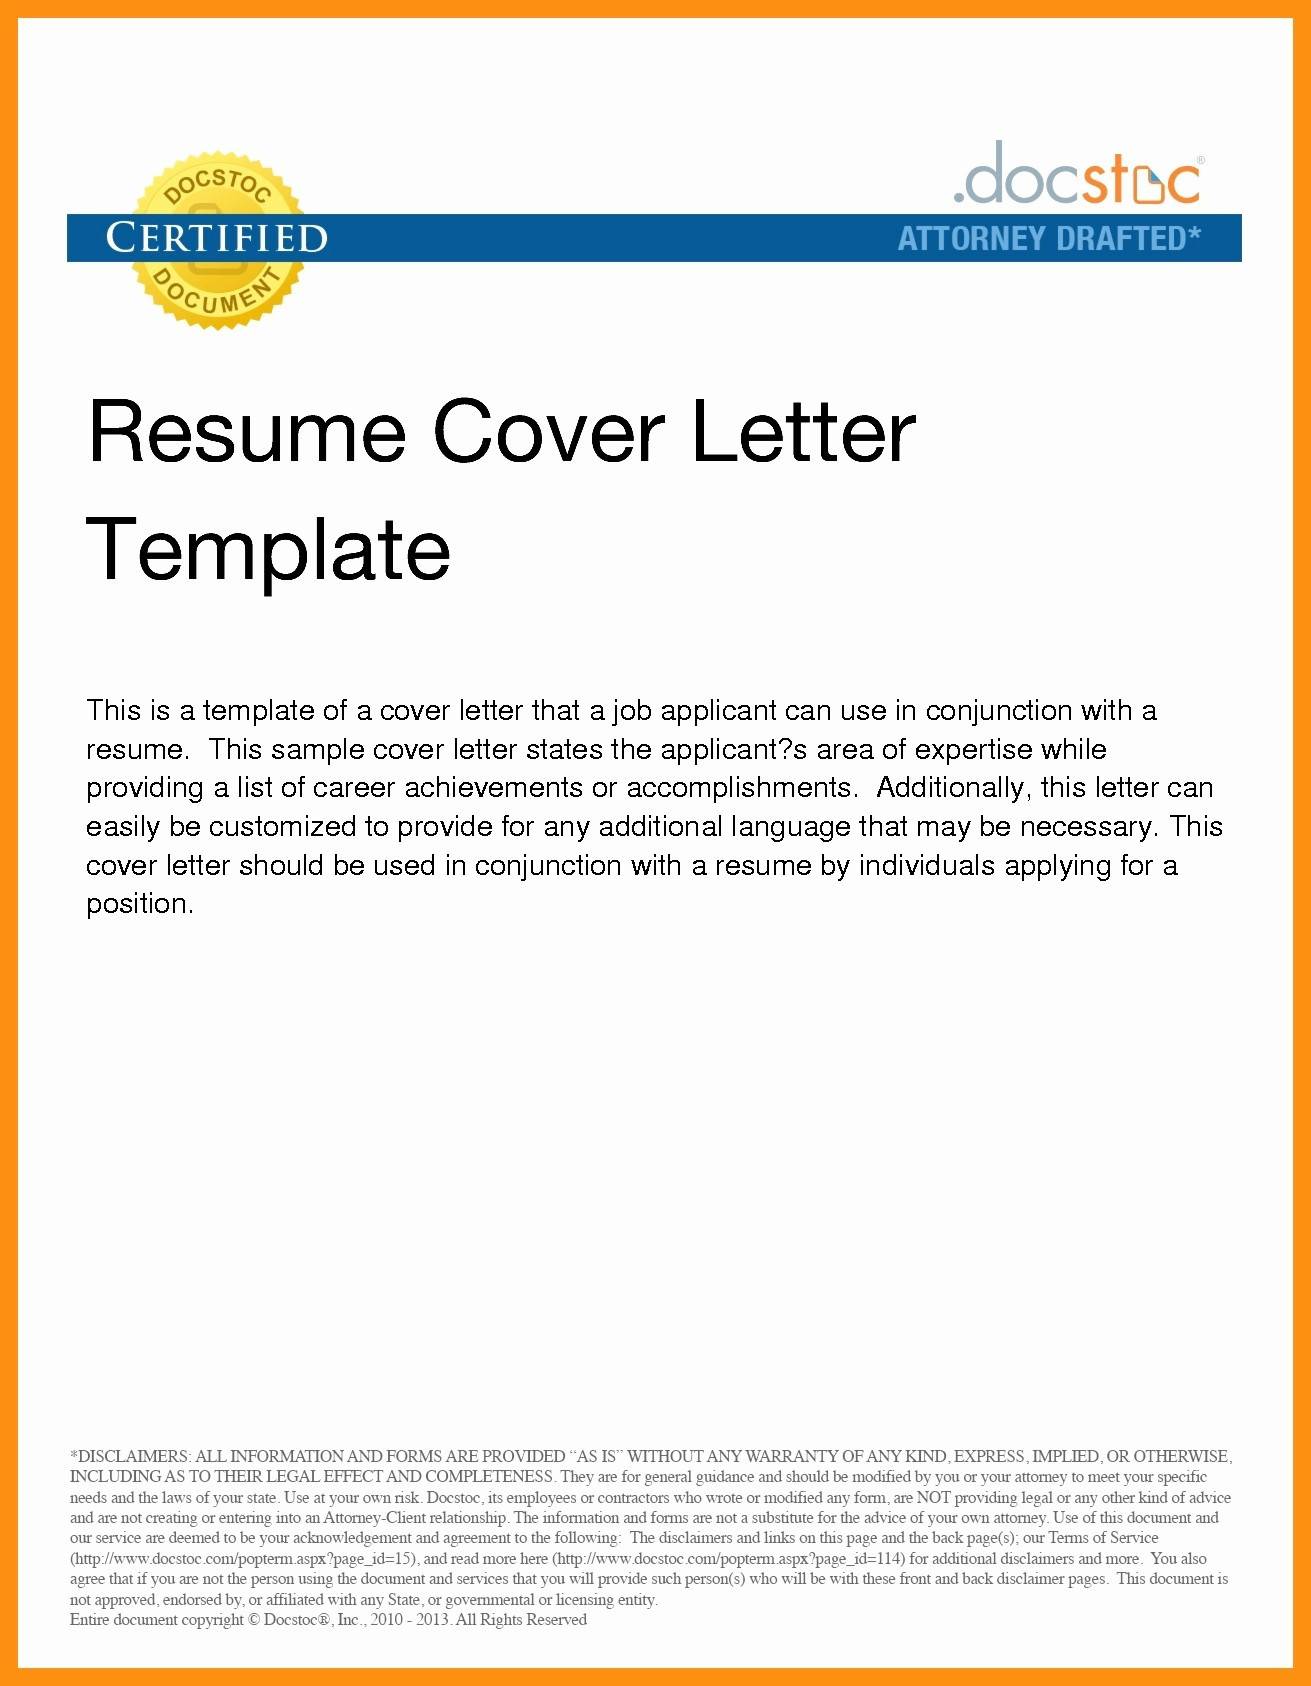 Sample Email Message for Sending Resume Sending Resume and Cover Letter by Email Collection